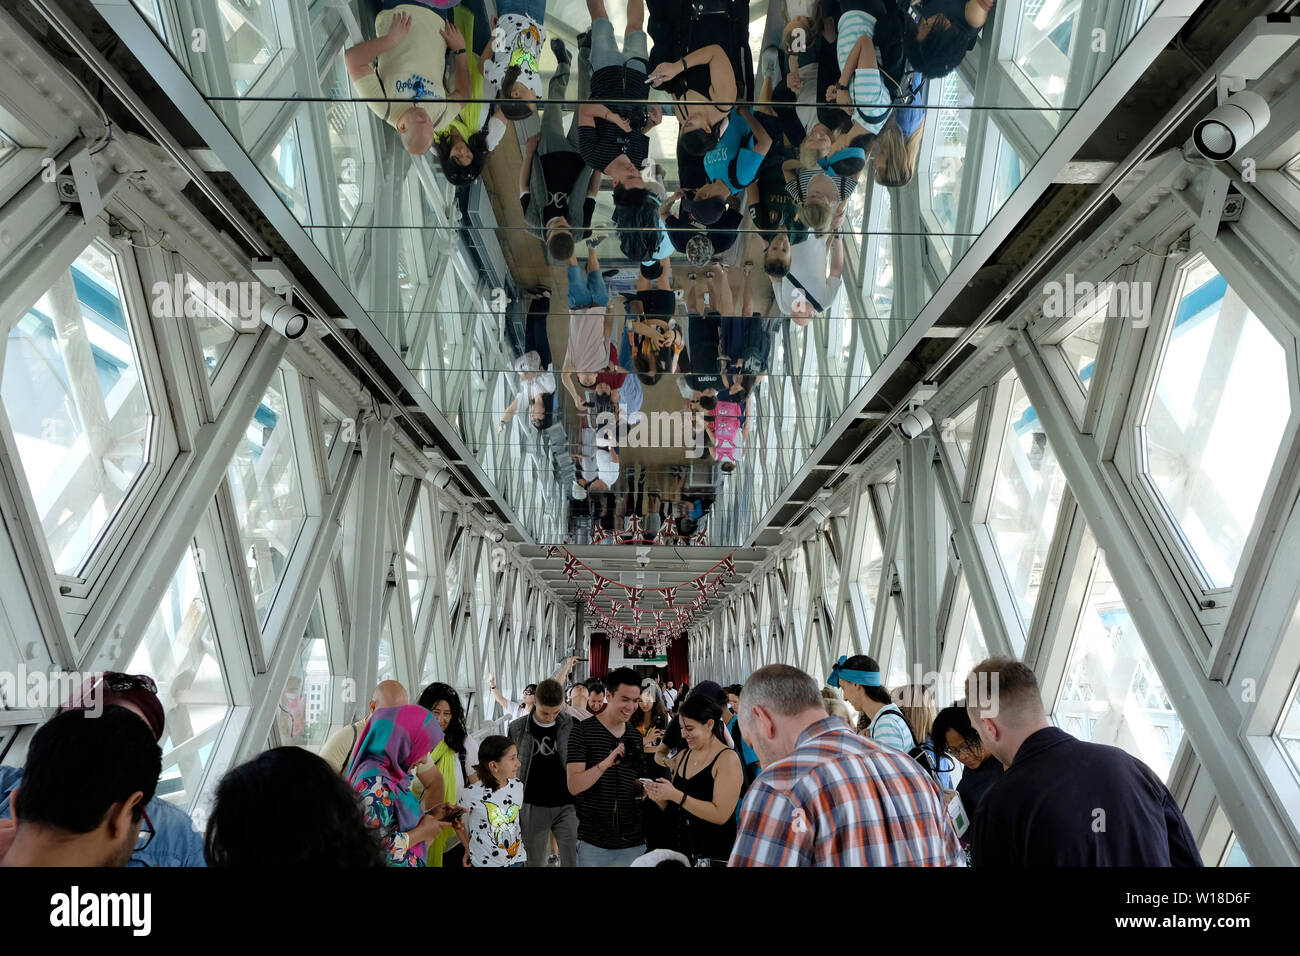 Reflection of people on ceiling, Tower Bridge, London Stock Photo